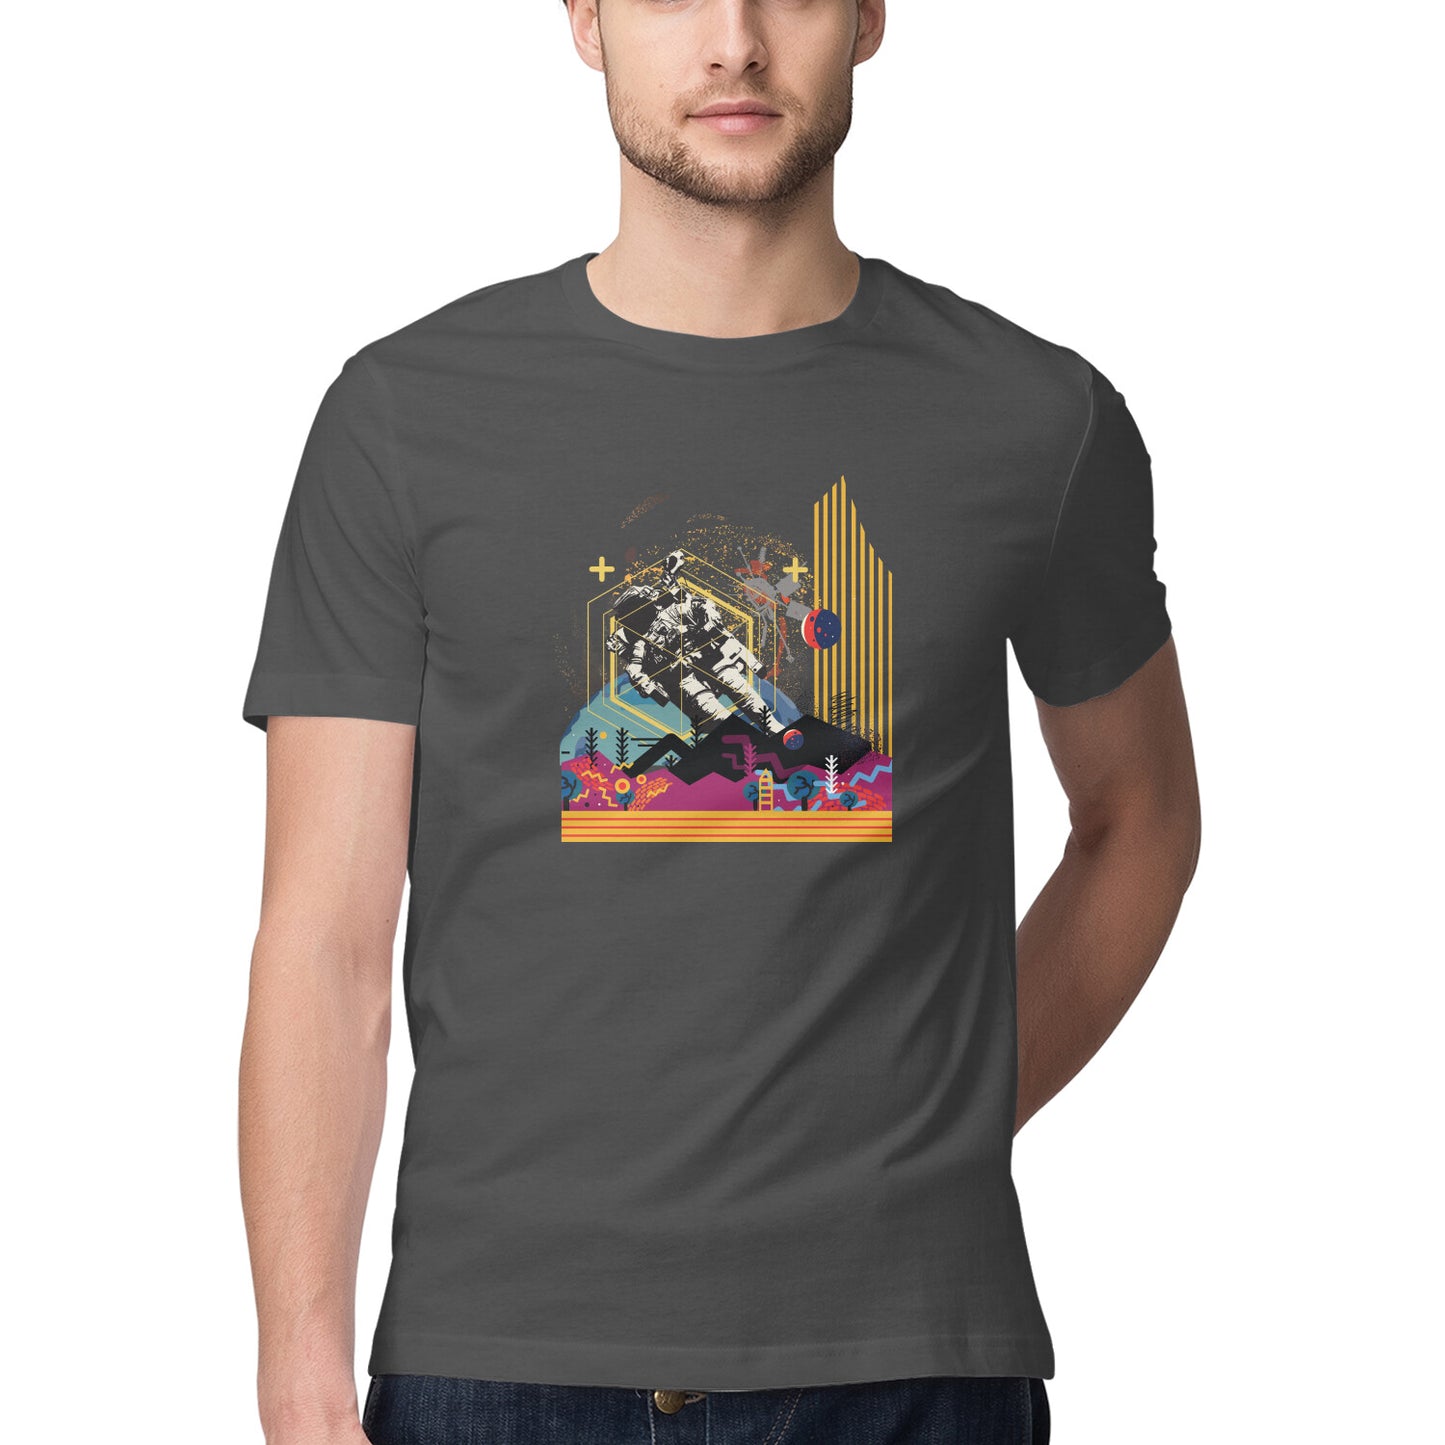 Space Art 13 Printed Graphic T-Shirt